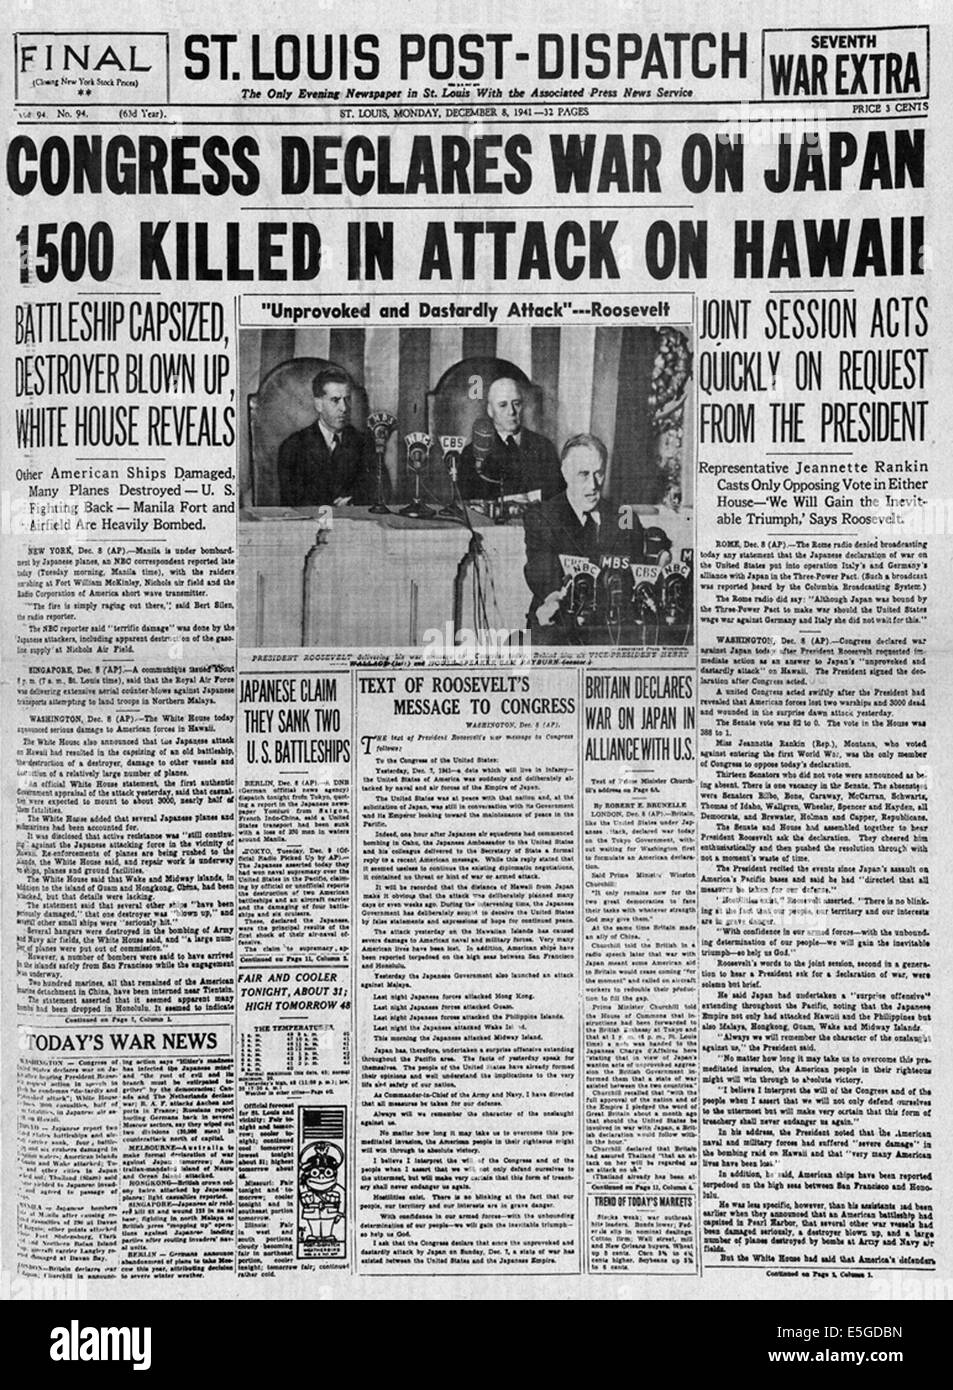 1941 St. Louis Post-Dispatch front page reporting Japanese attack Stock Photo: 72276505 - Alamy